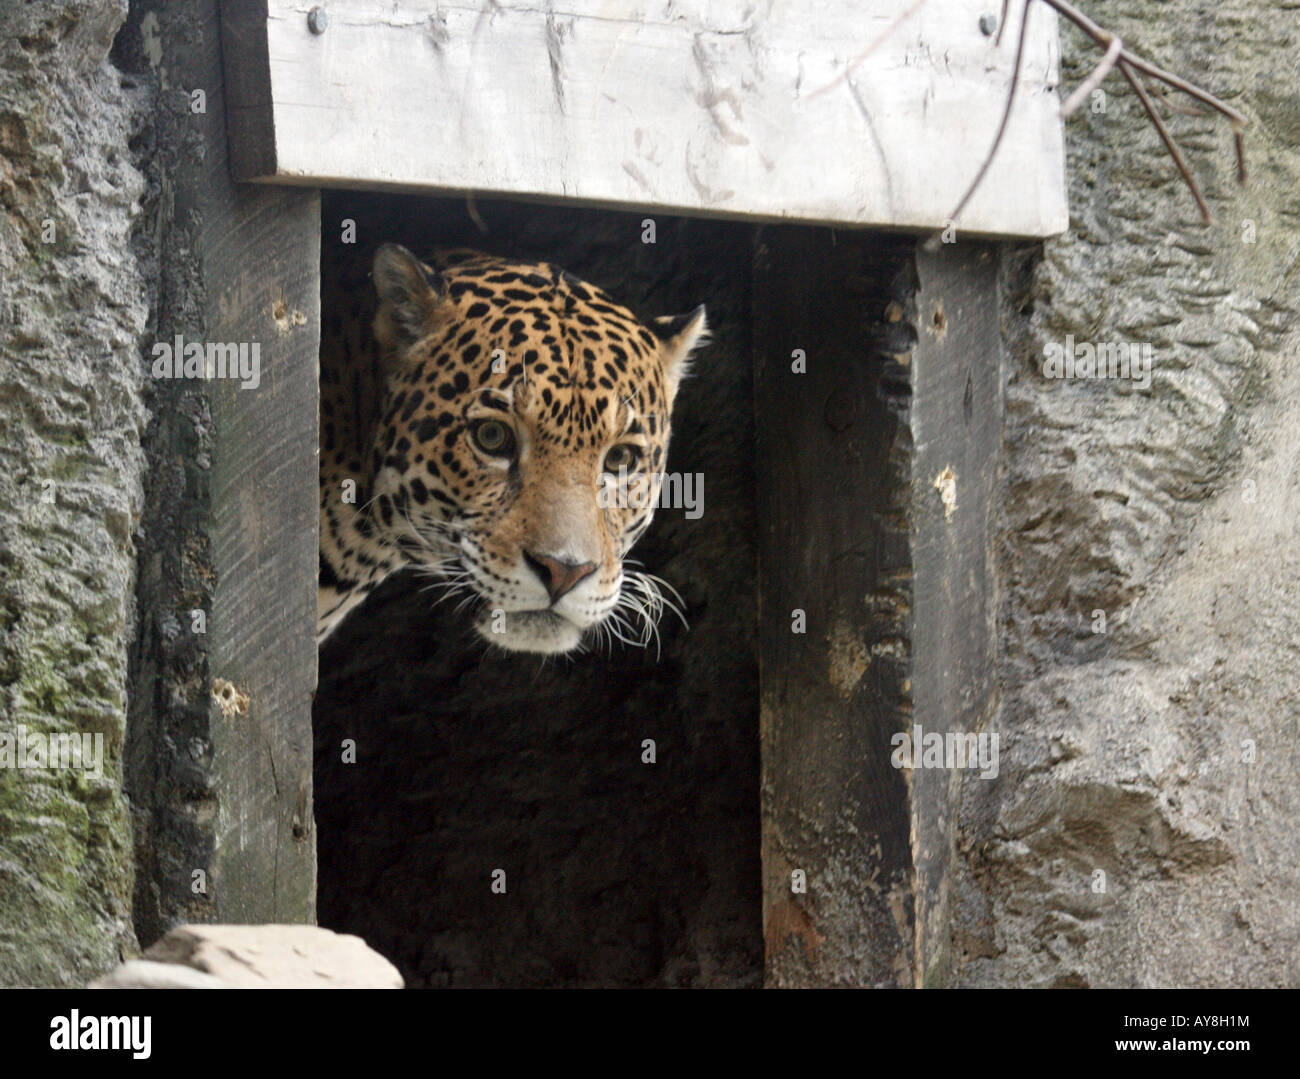 A jaguar looks out from a mine shaft created on exhibit at the